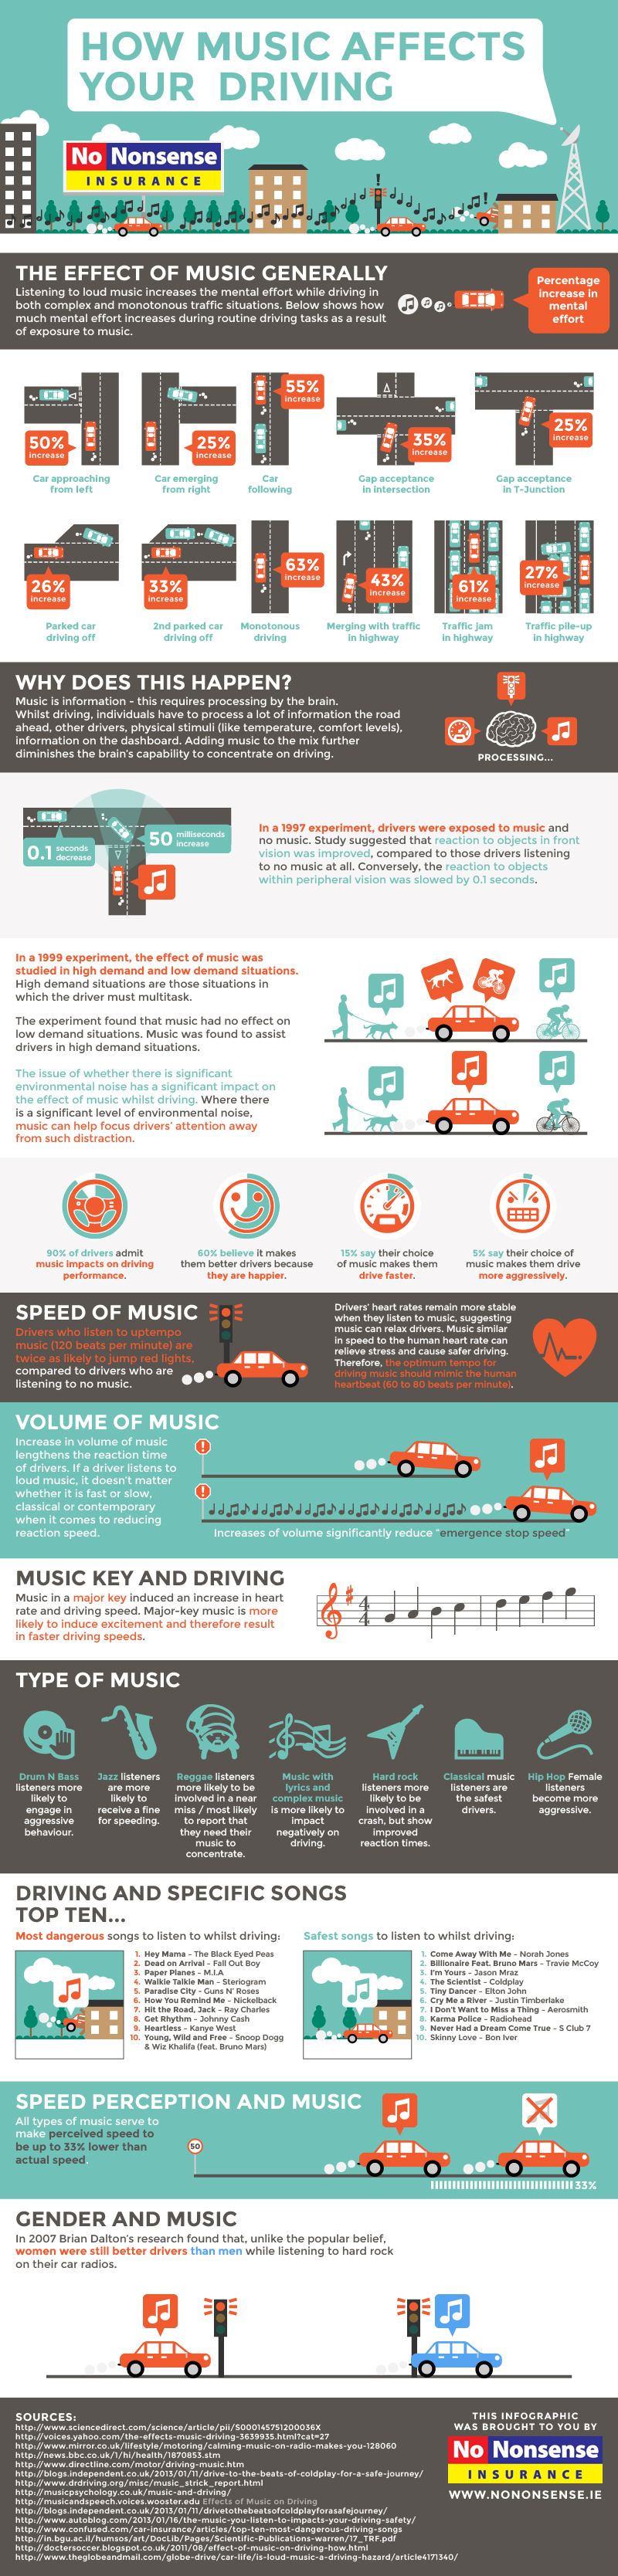 How Music Affects Your Driving